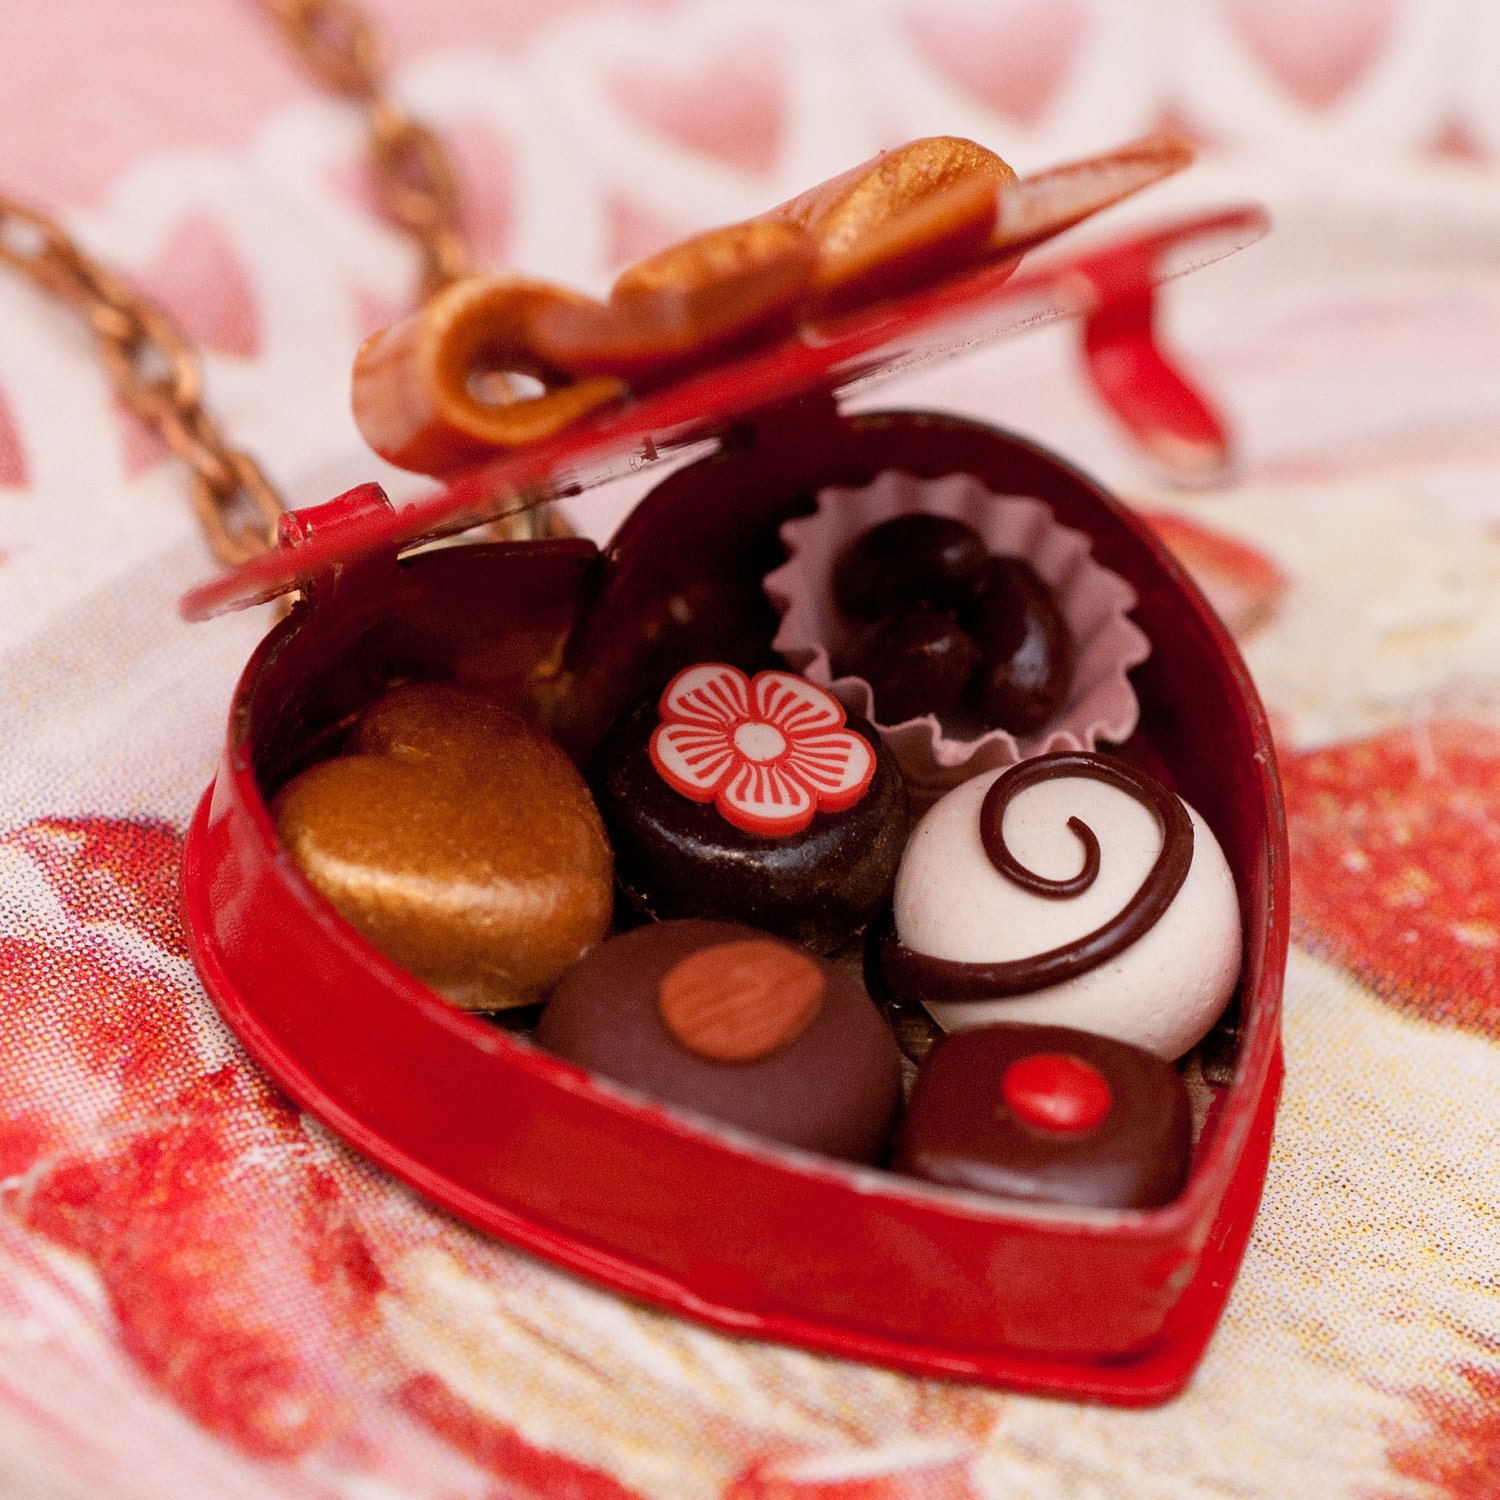 Necklace - Sweetheart Red Valentines Day Box of Gourmet Chocolates Handmade by Roscata